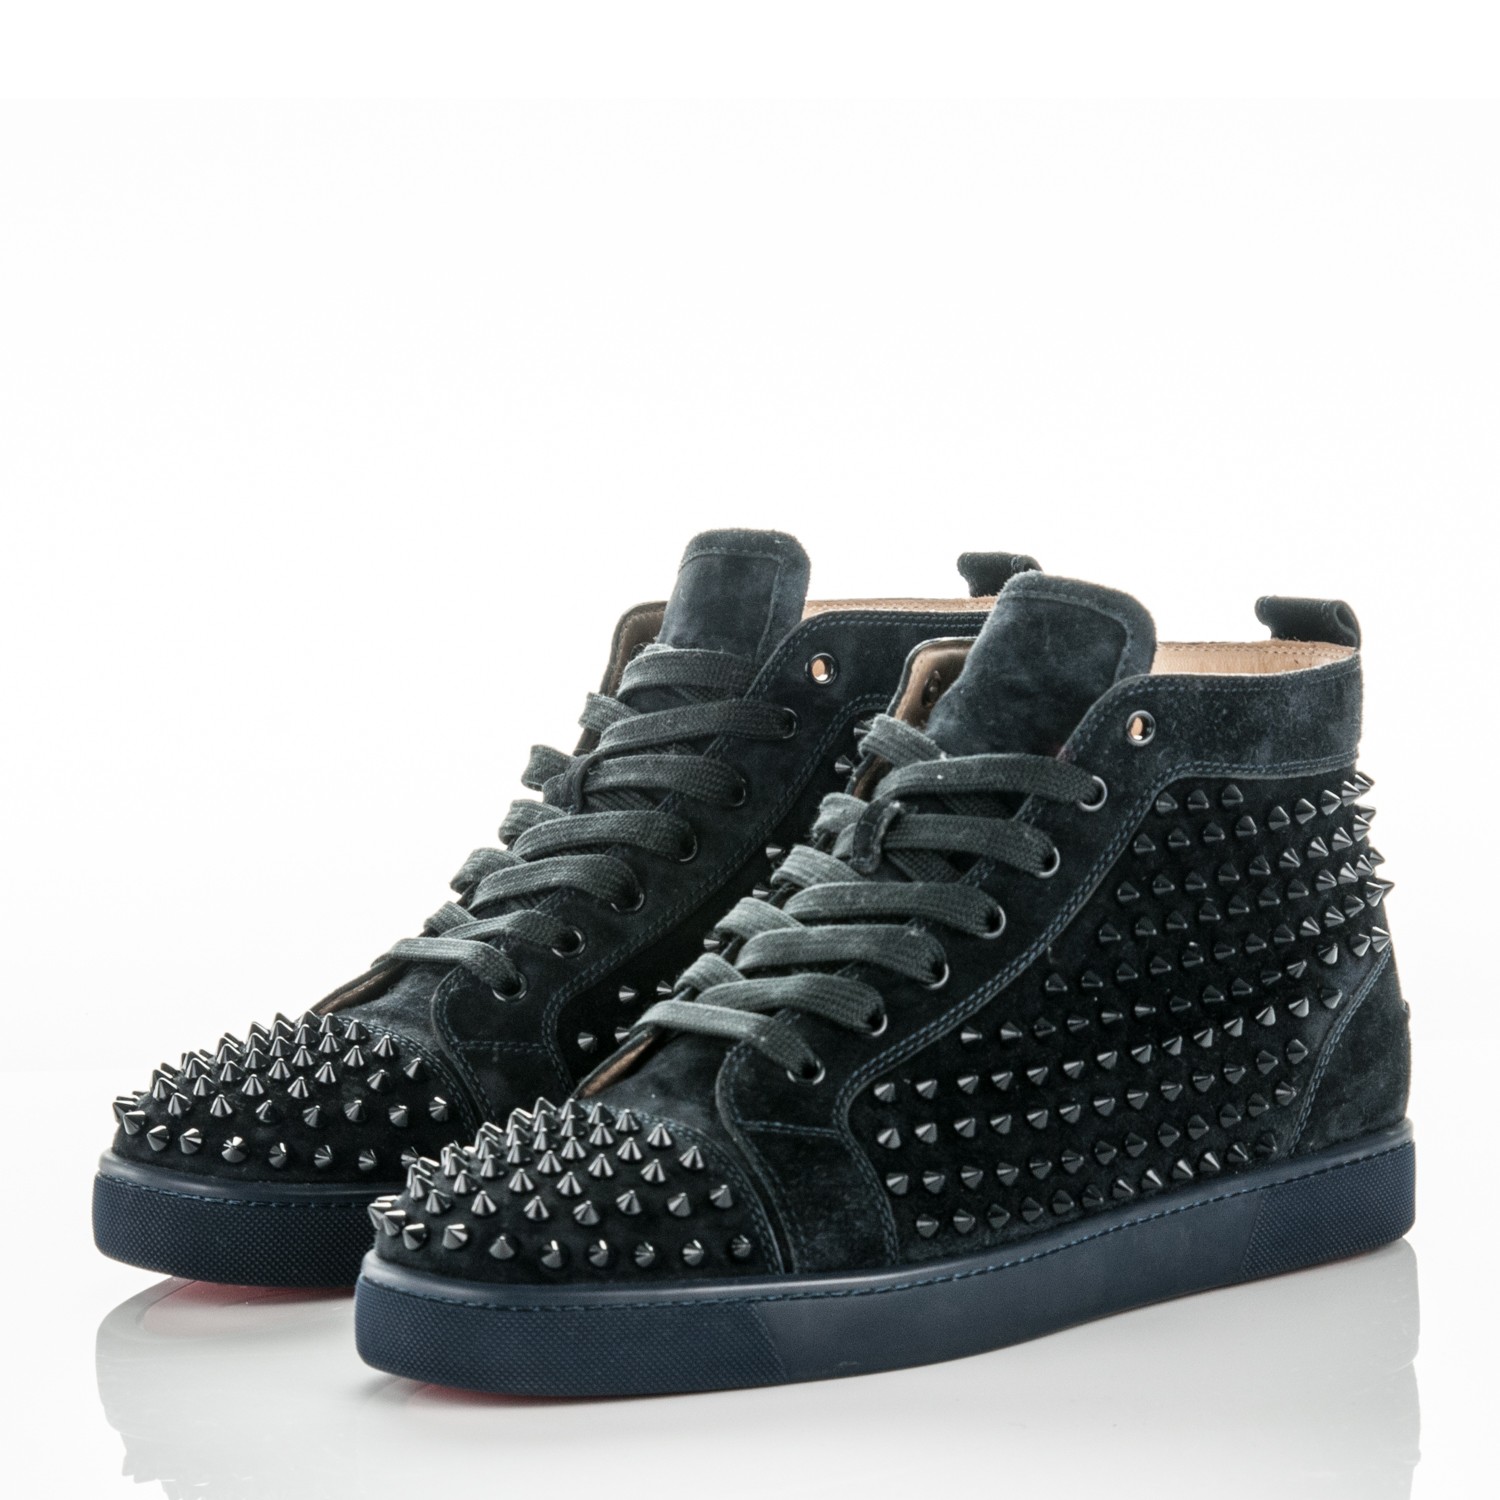 louboutin suede spikes